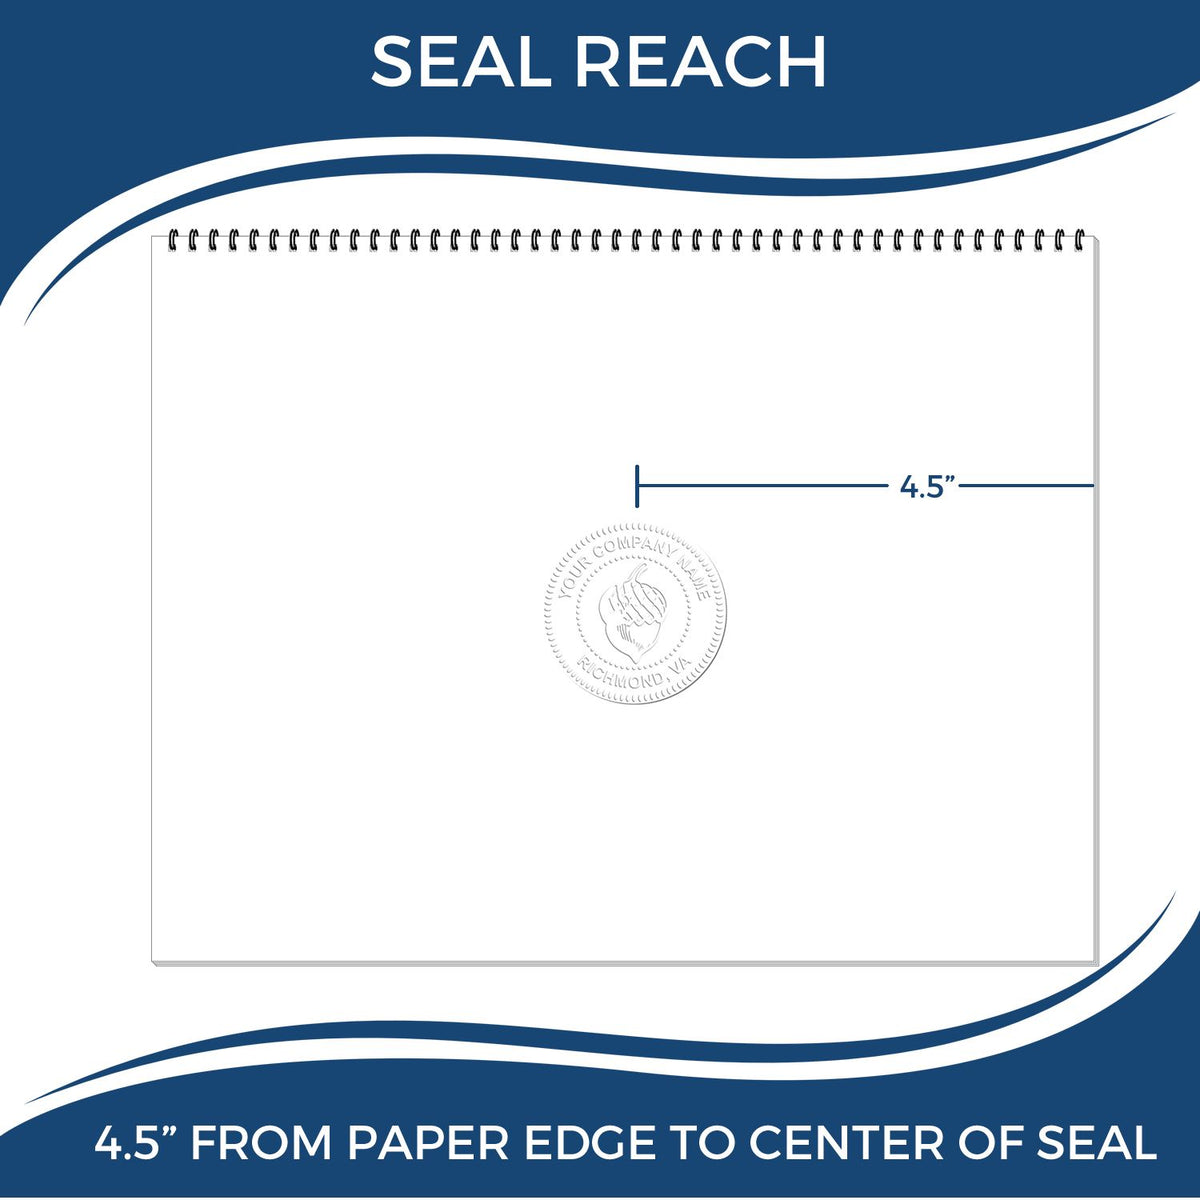 An infographic showing the seal reach which is represented by a ruler and a miniature seal image of the State of Illinois Extended Long Reach Engineer Seal